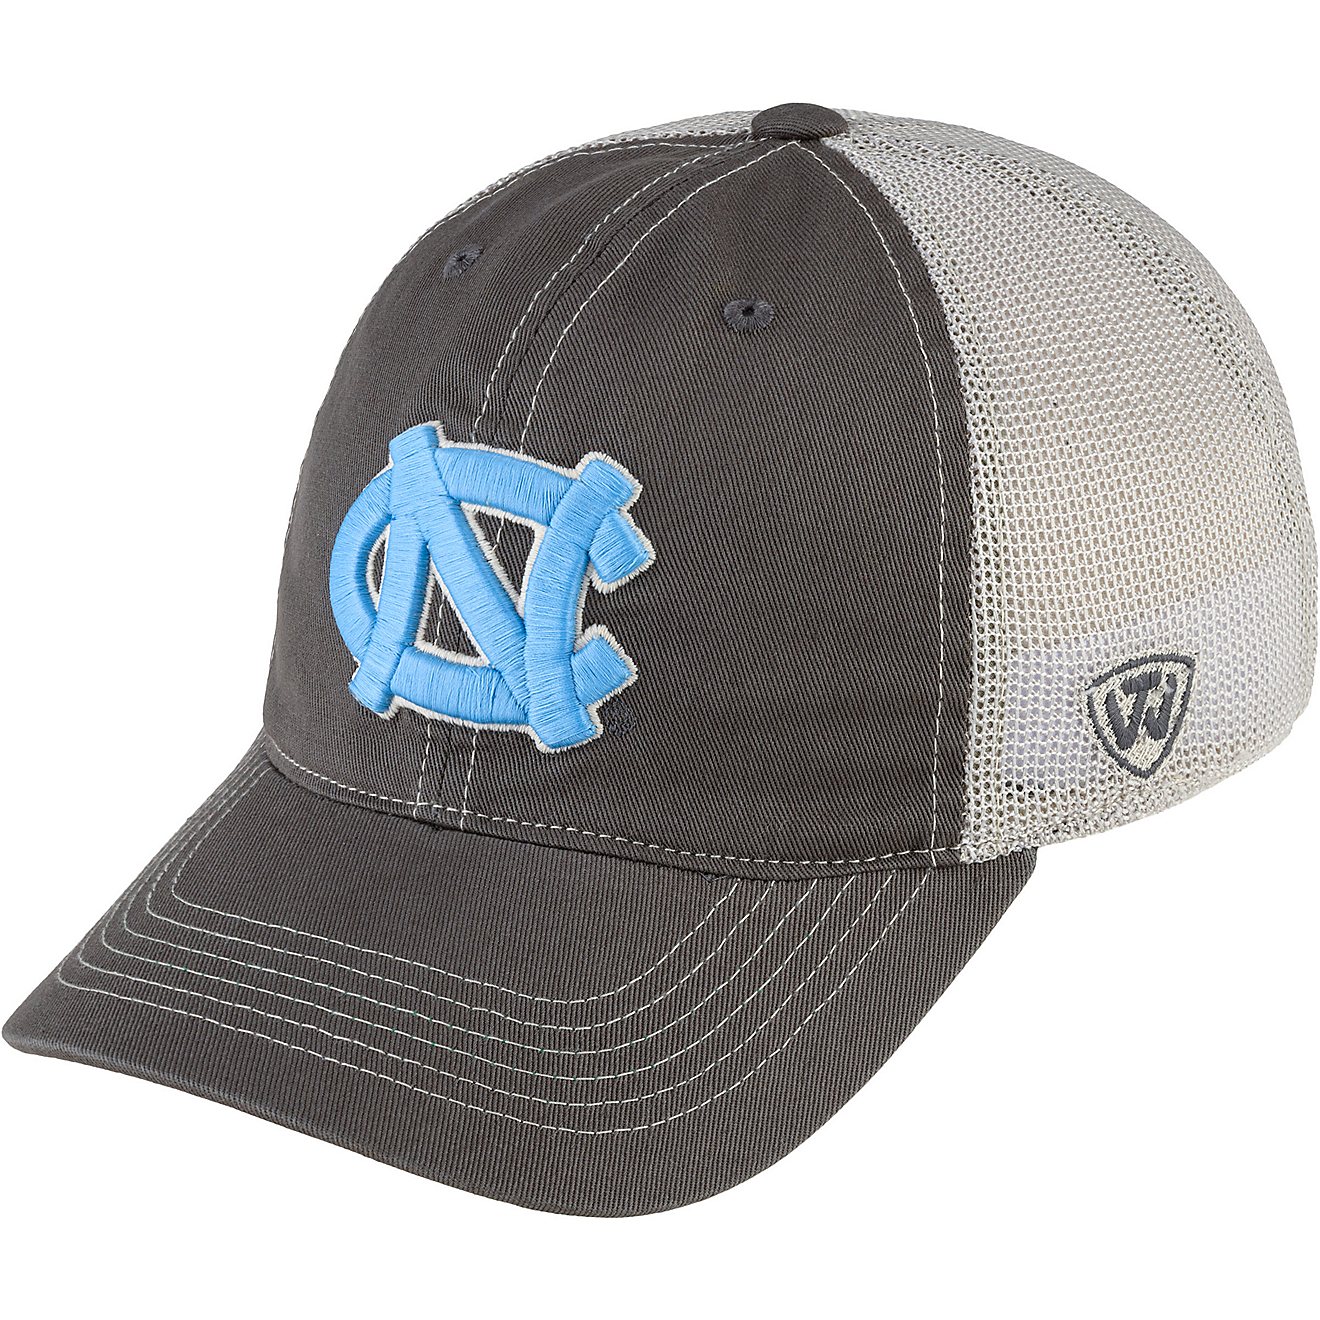 Top of the World Men's University of North Carolina Putty Cap                                                                    - view number 1